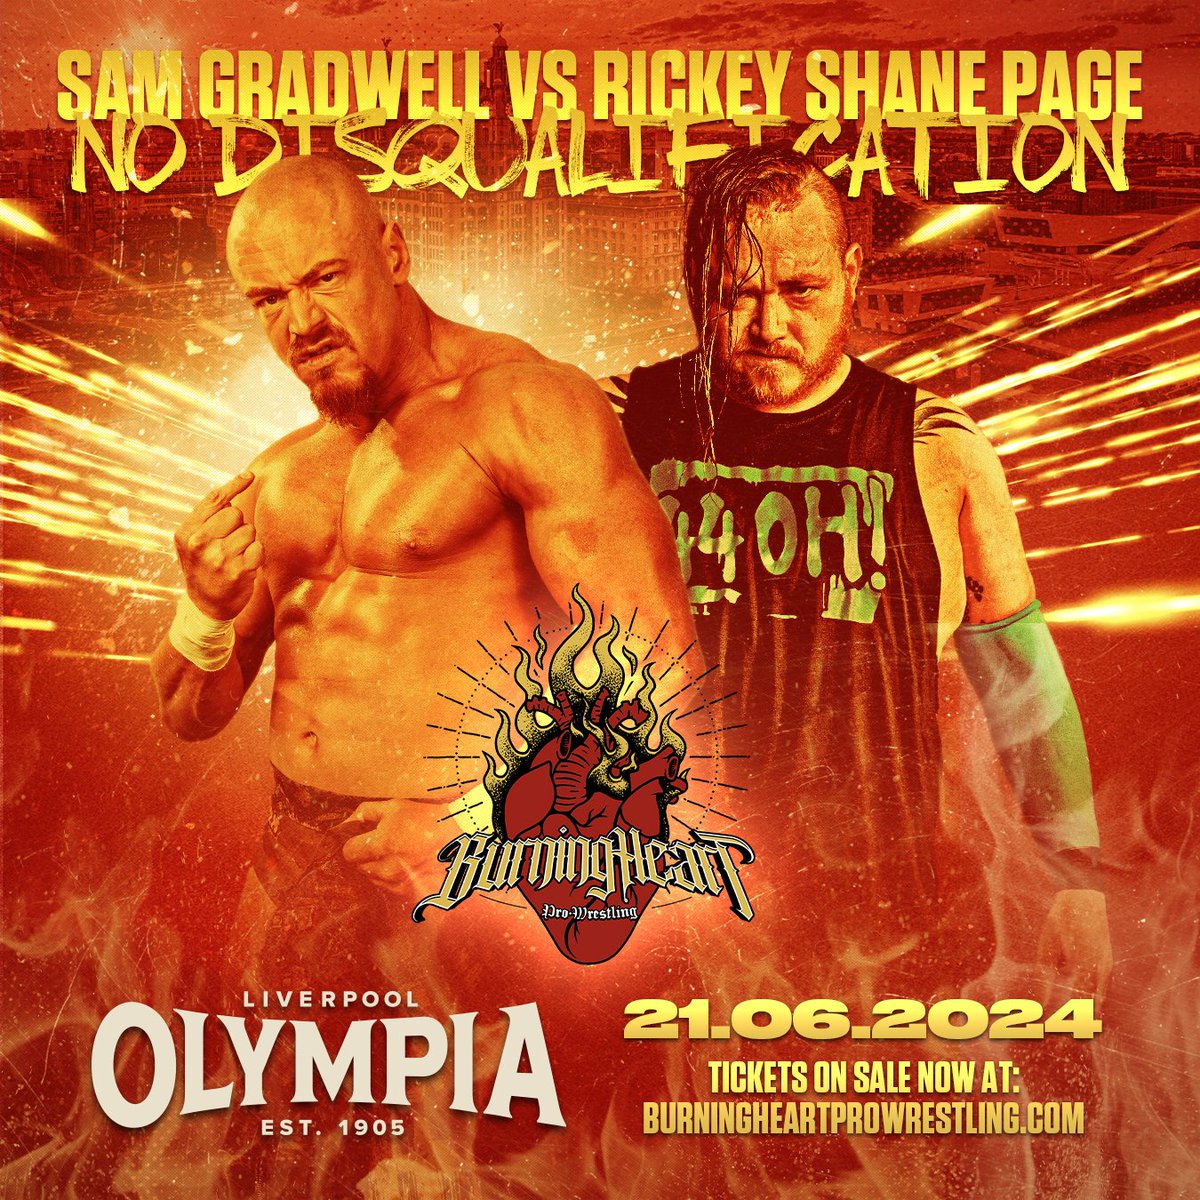 BREAKING! Gradwell vs. RSP No DQ in Liverpool! Gradwell had some choice words for RSP and his style of wrestling, well now he may have to eat his words! At the Olympia June 21st there will be NO RULES when Gradwell and RSP go head to head for the first time ever! 🎟 in bio!